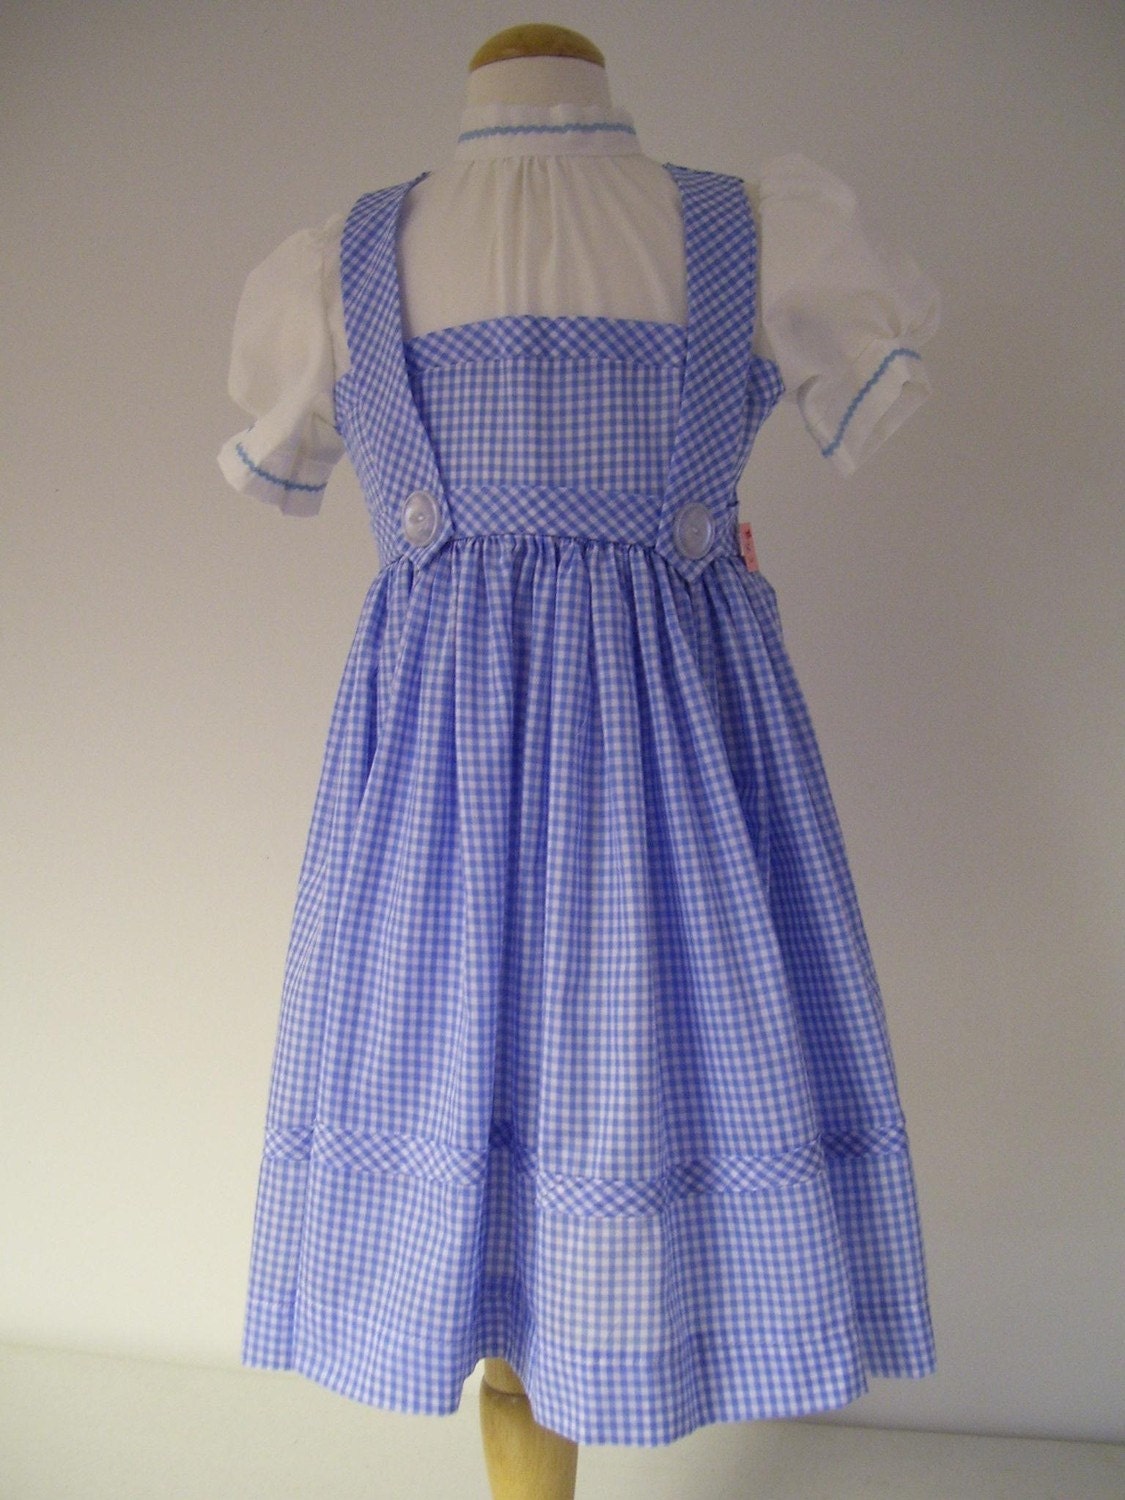 dorothy dress size 5 child by ruth8062 on Etsy